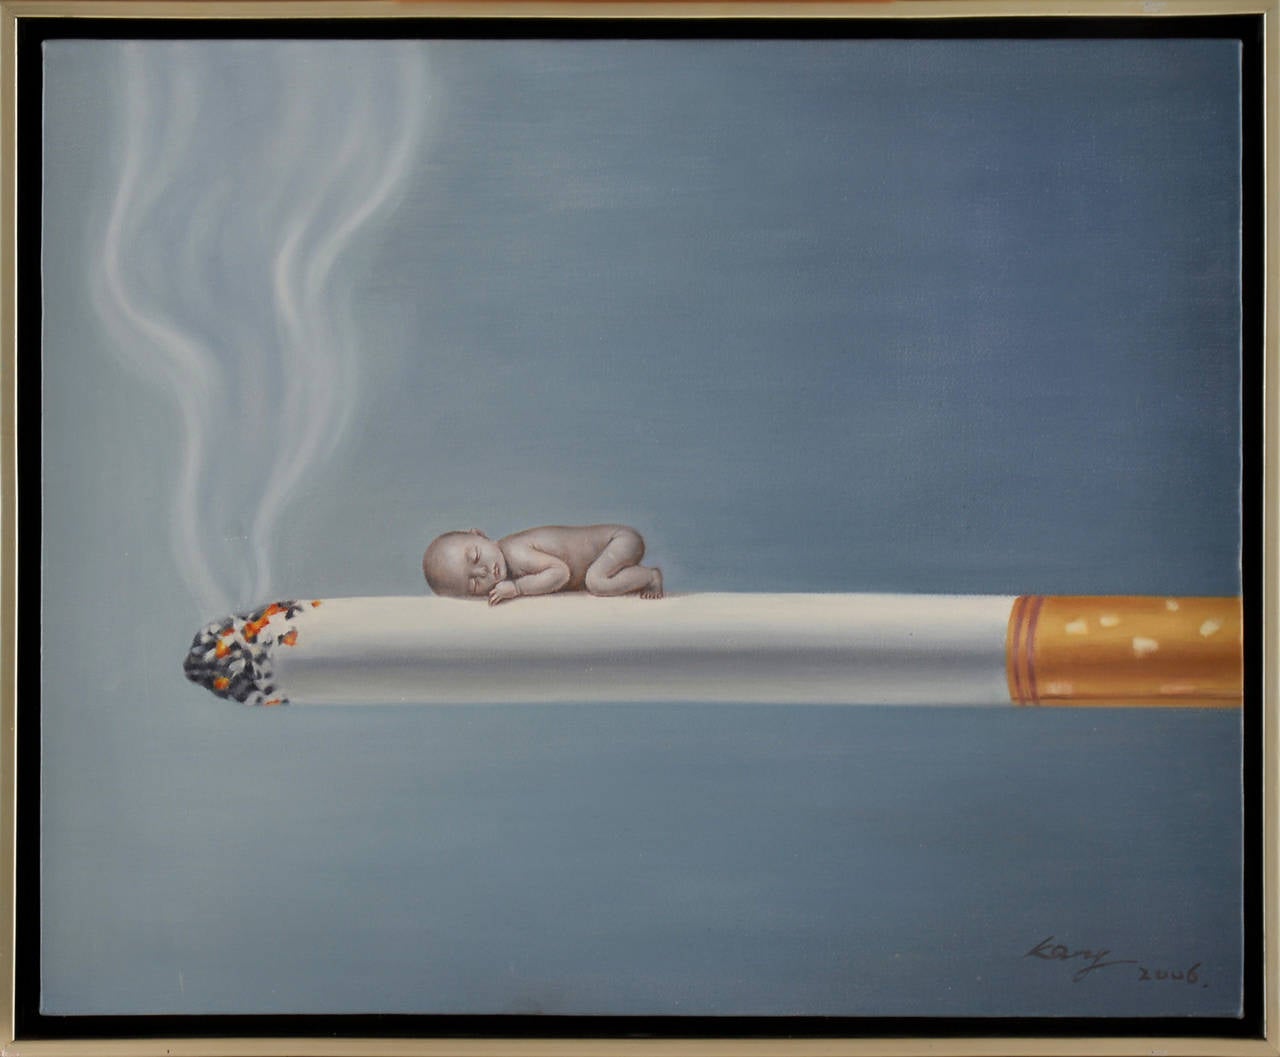 Kang Can (Chongqing, 1982), titled: Dont Wake Me Up, depicting a baby on a cigaret, signed and dated Kang 2006 lower right , oil on canvas, canvas: 45x55 cm, frame: 49x59

Born in 1982 in Chongqing (China), Kang Can graduated from the  Sichuan